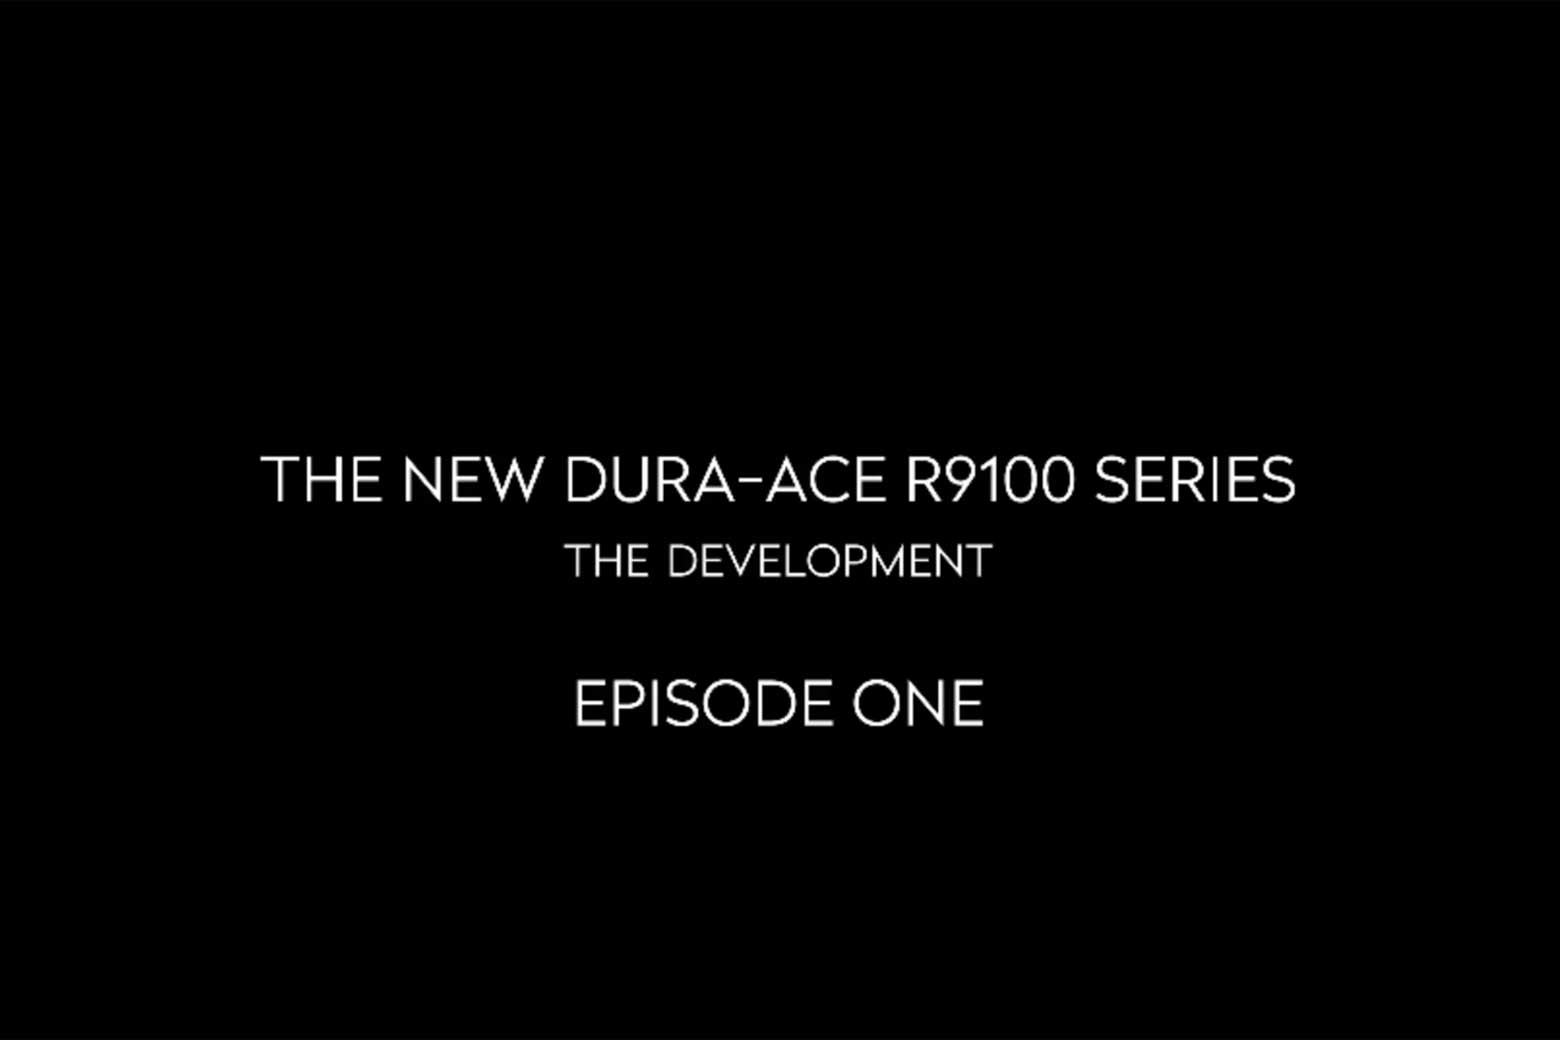 Shimano - The New Dura-Ace R9100 Series Episode 1 main image